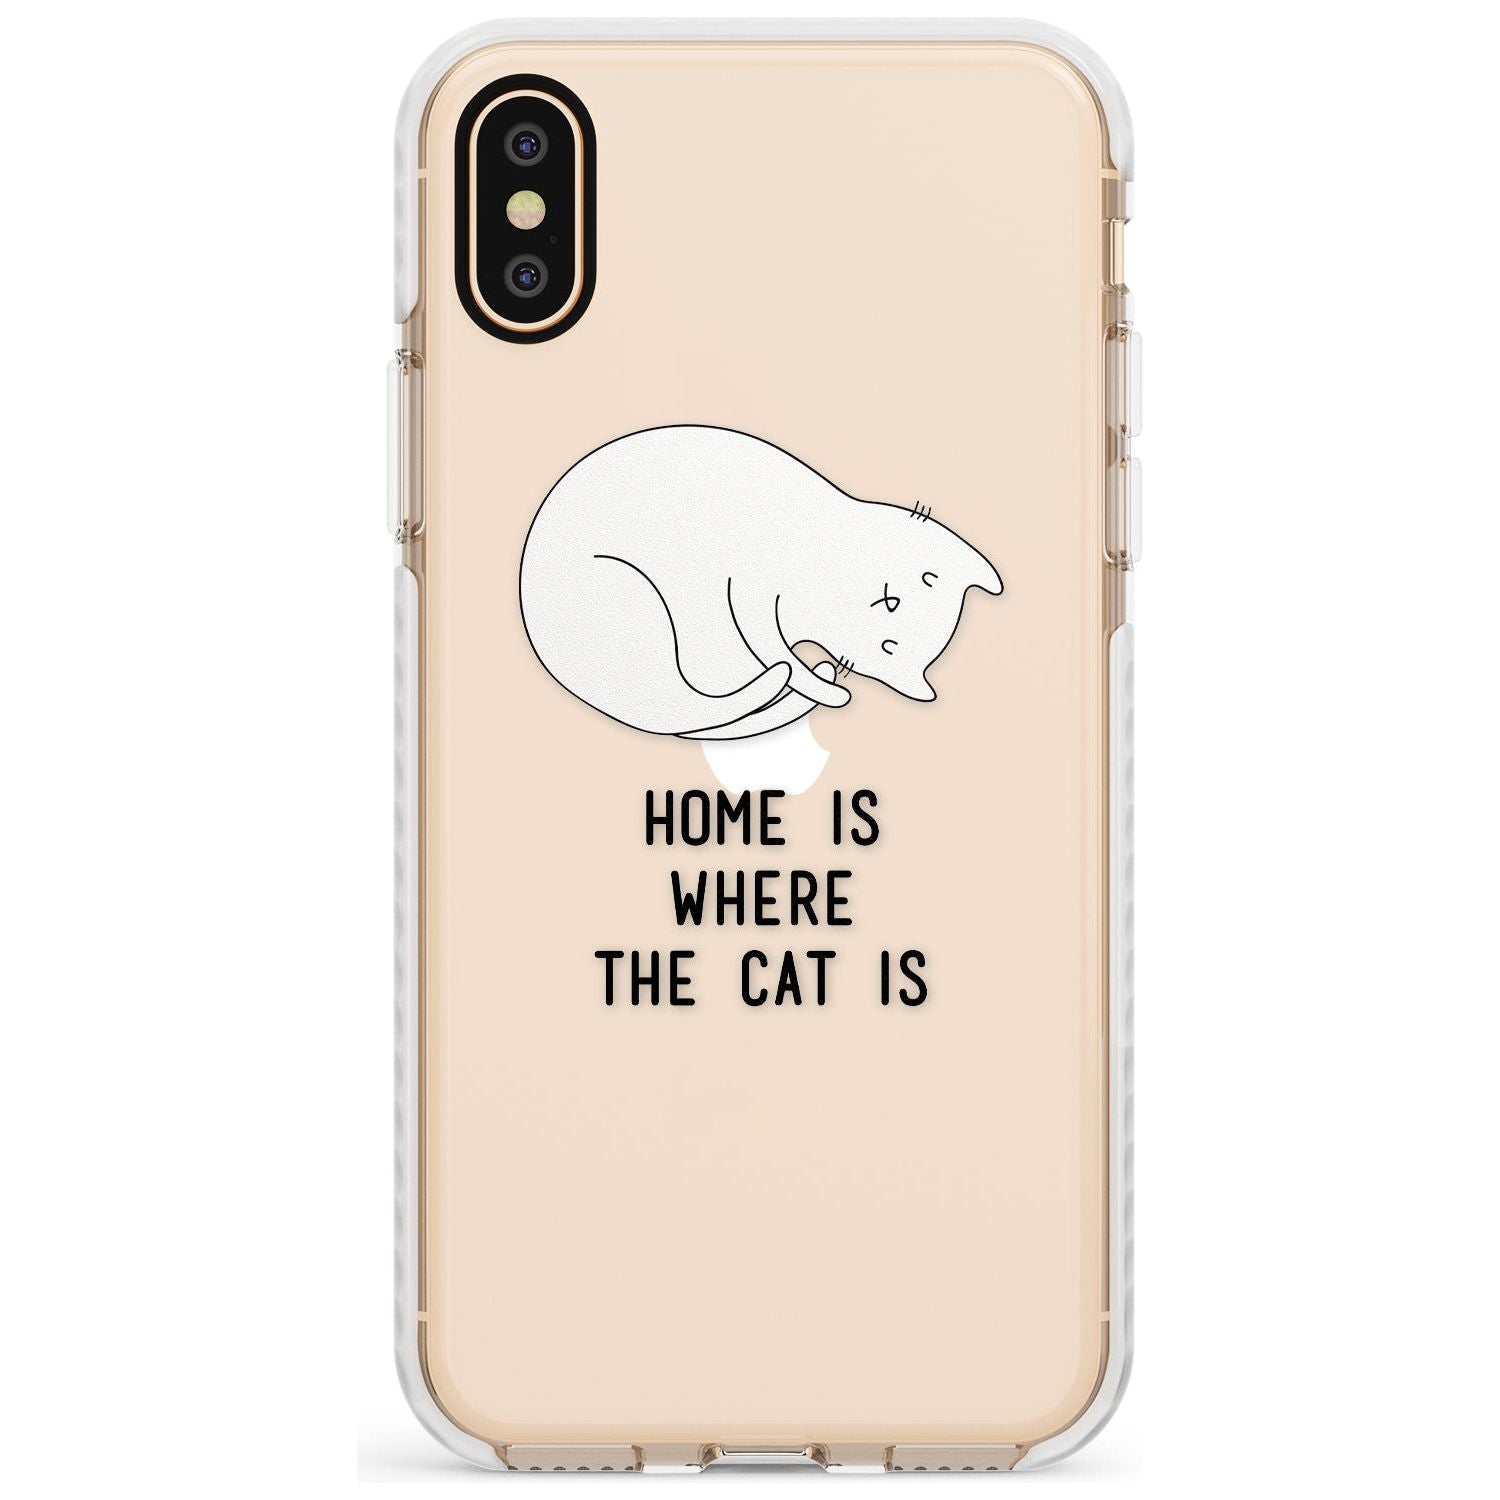 Home Is Where the Cat is Slim TPU Phone Case Warehouse X XS Max XR